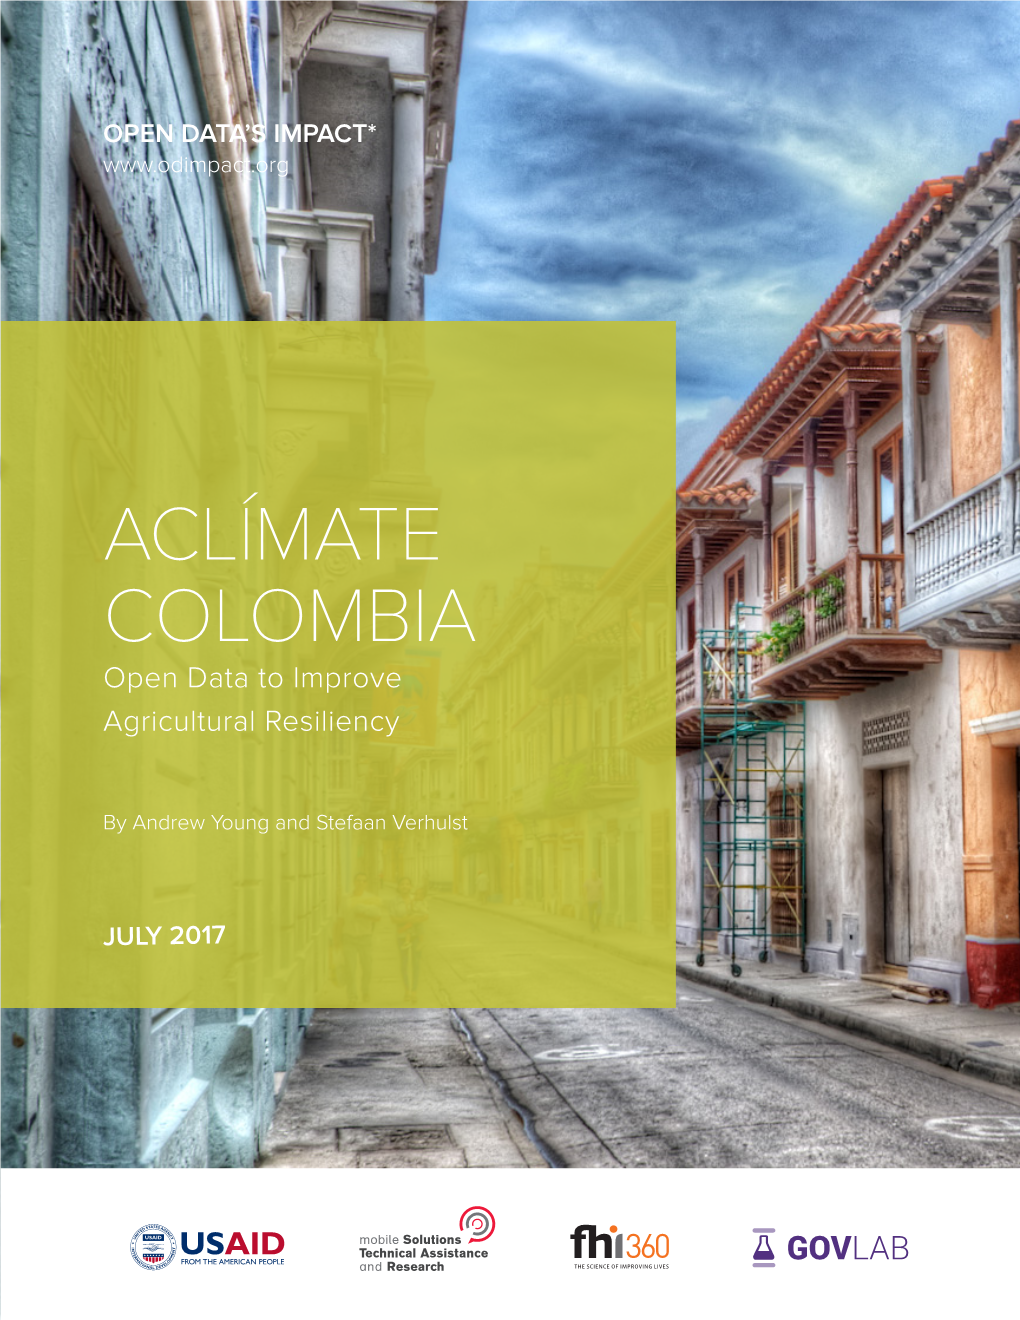 ACLÍMATE COLOMBIA Open Data to Improve Agricultural Resiliency